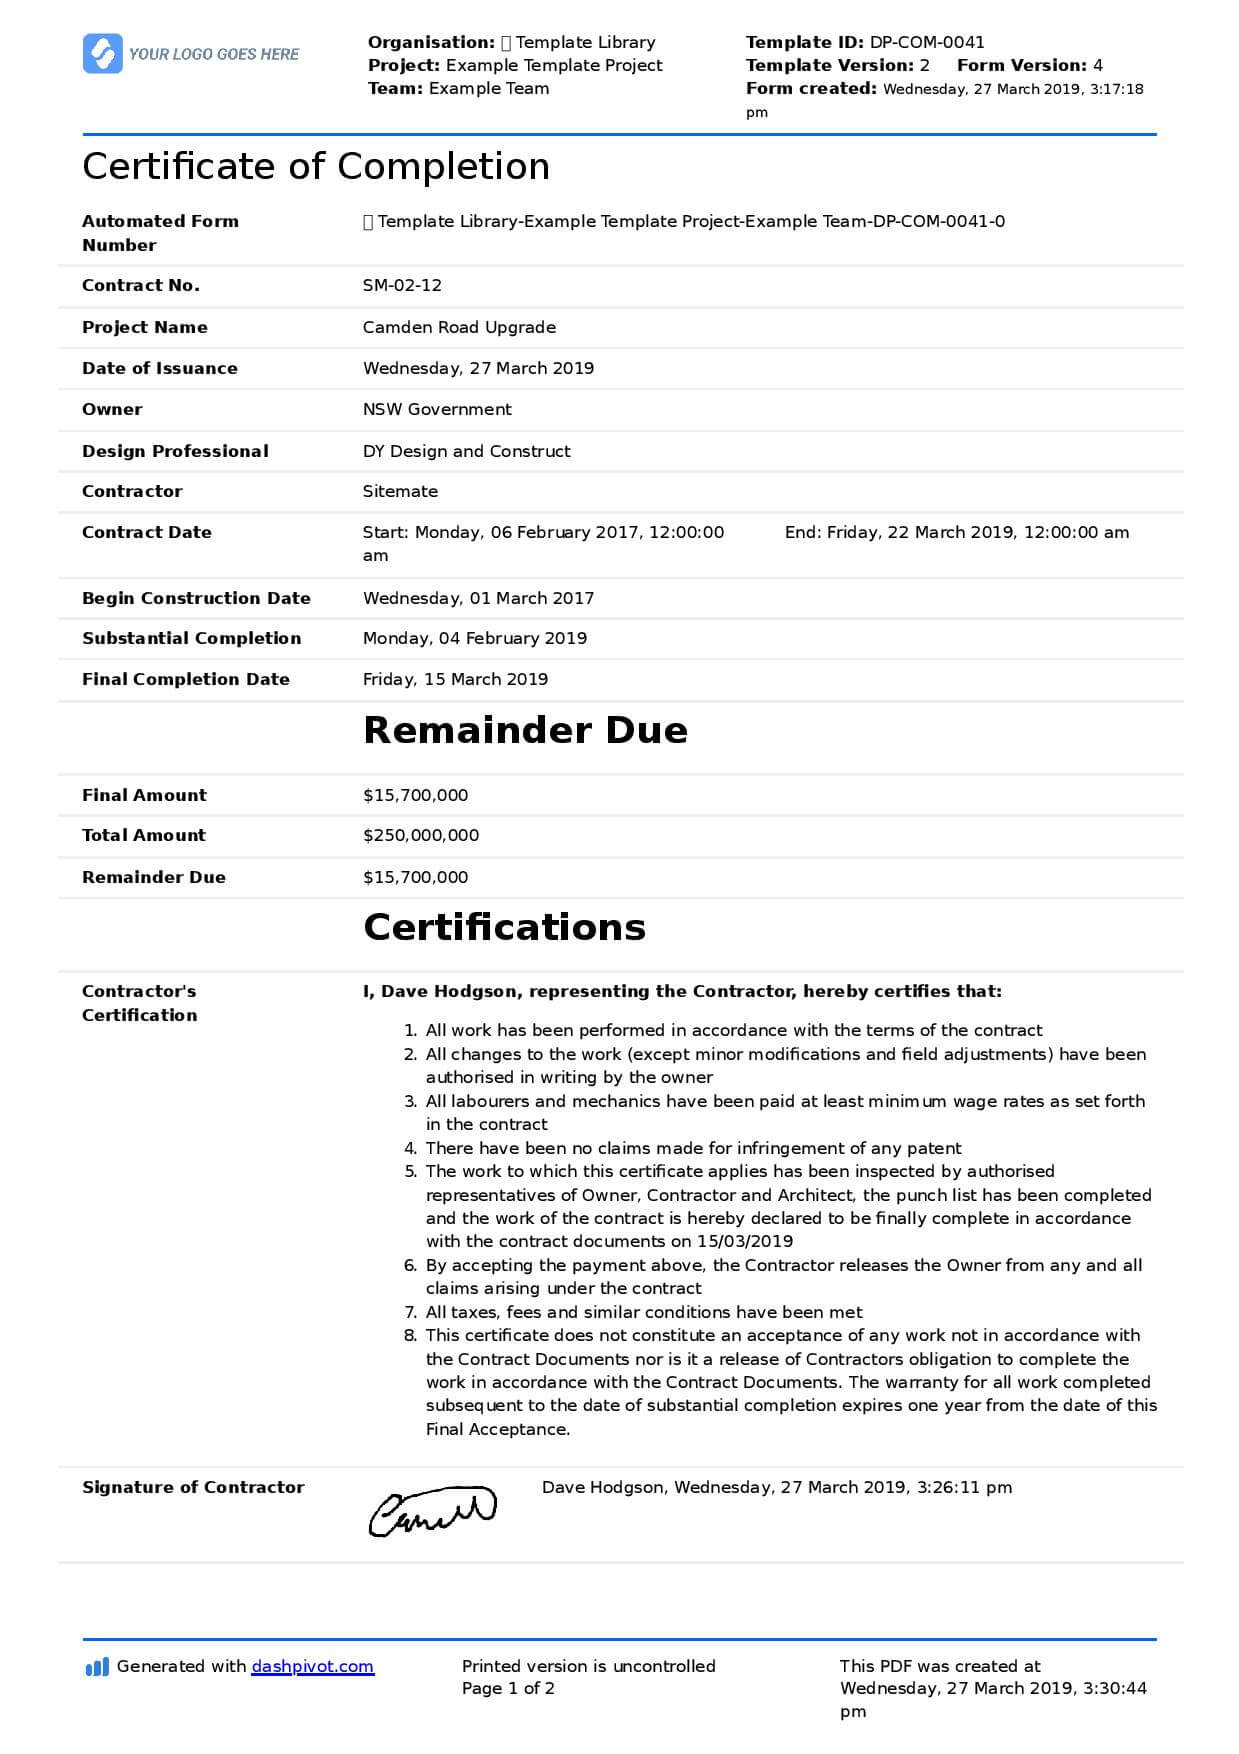 Certificate Of Completion For Construction (Free Template + Within Certificate Template For Project Completion